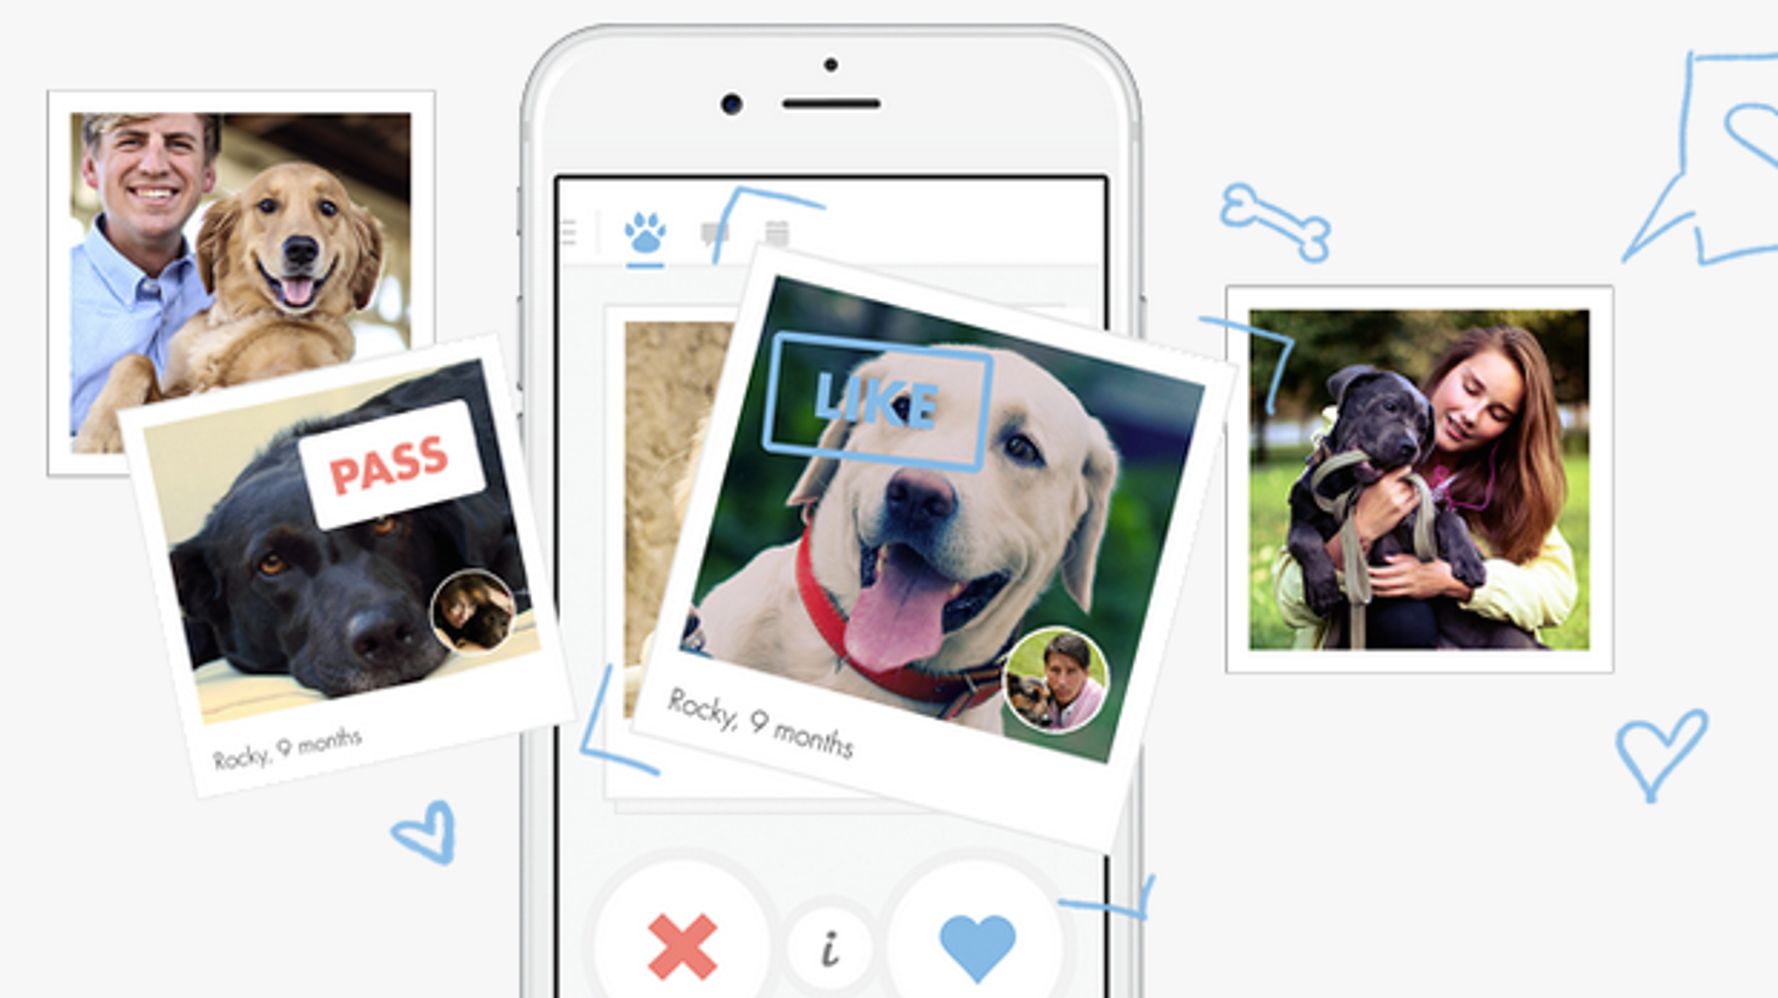 Tinder for Dogs